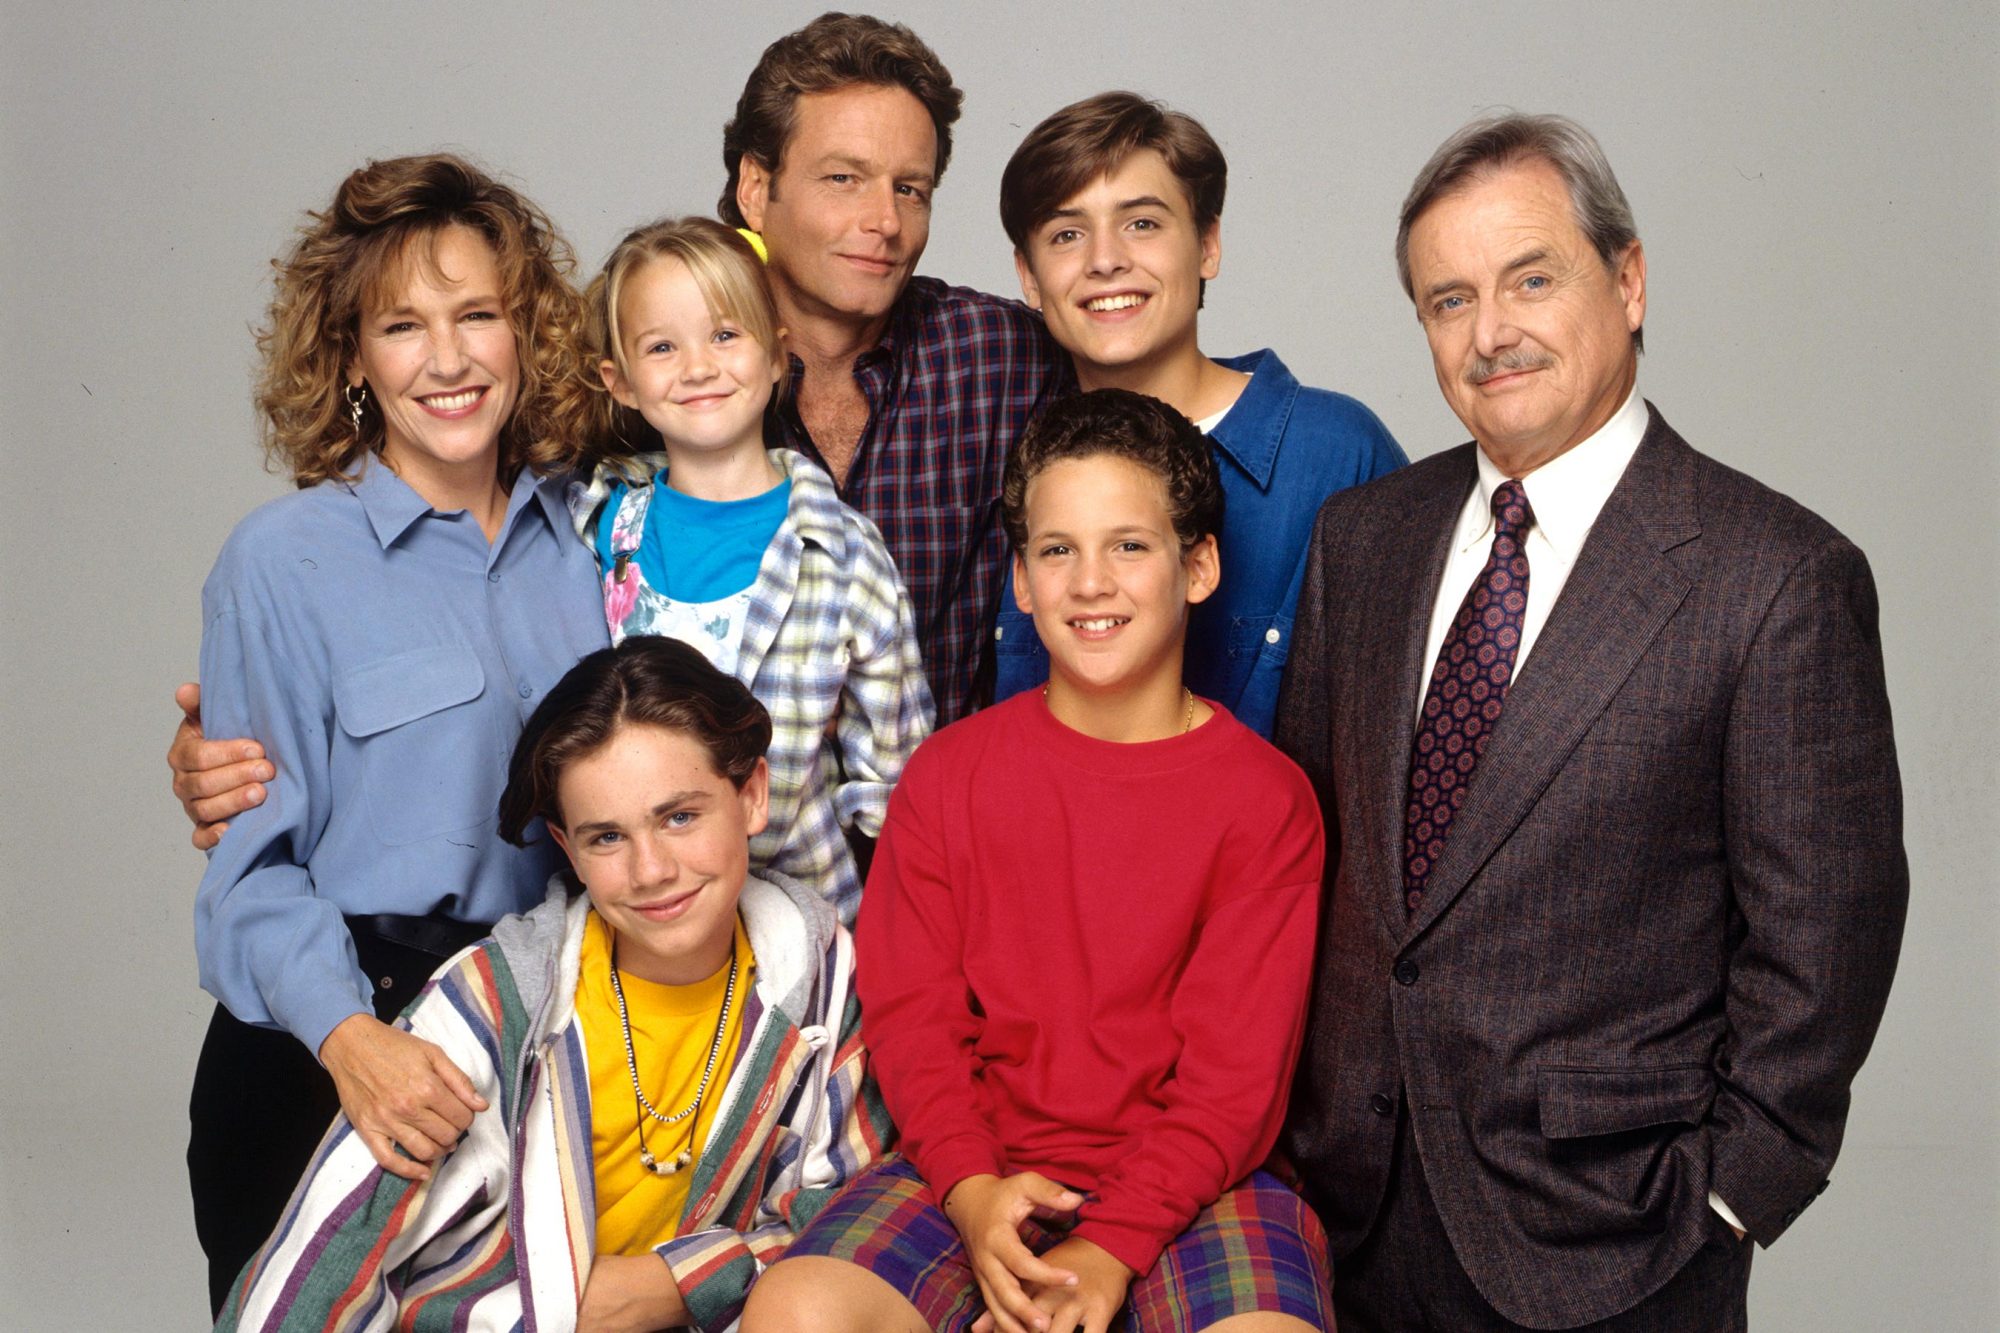 L-R: BETSY RANDLE;RIDER STRONG;LILY NICKSAY;WILLIAM RUSS;BEN SAVAGE;WILL FRIEDLE;WILLIAM DANIELS